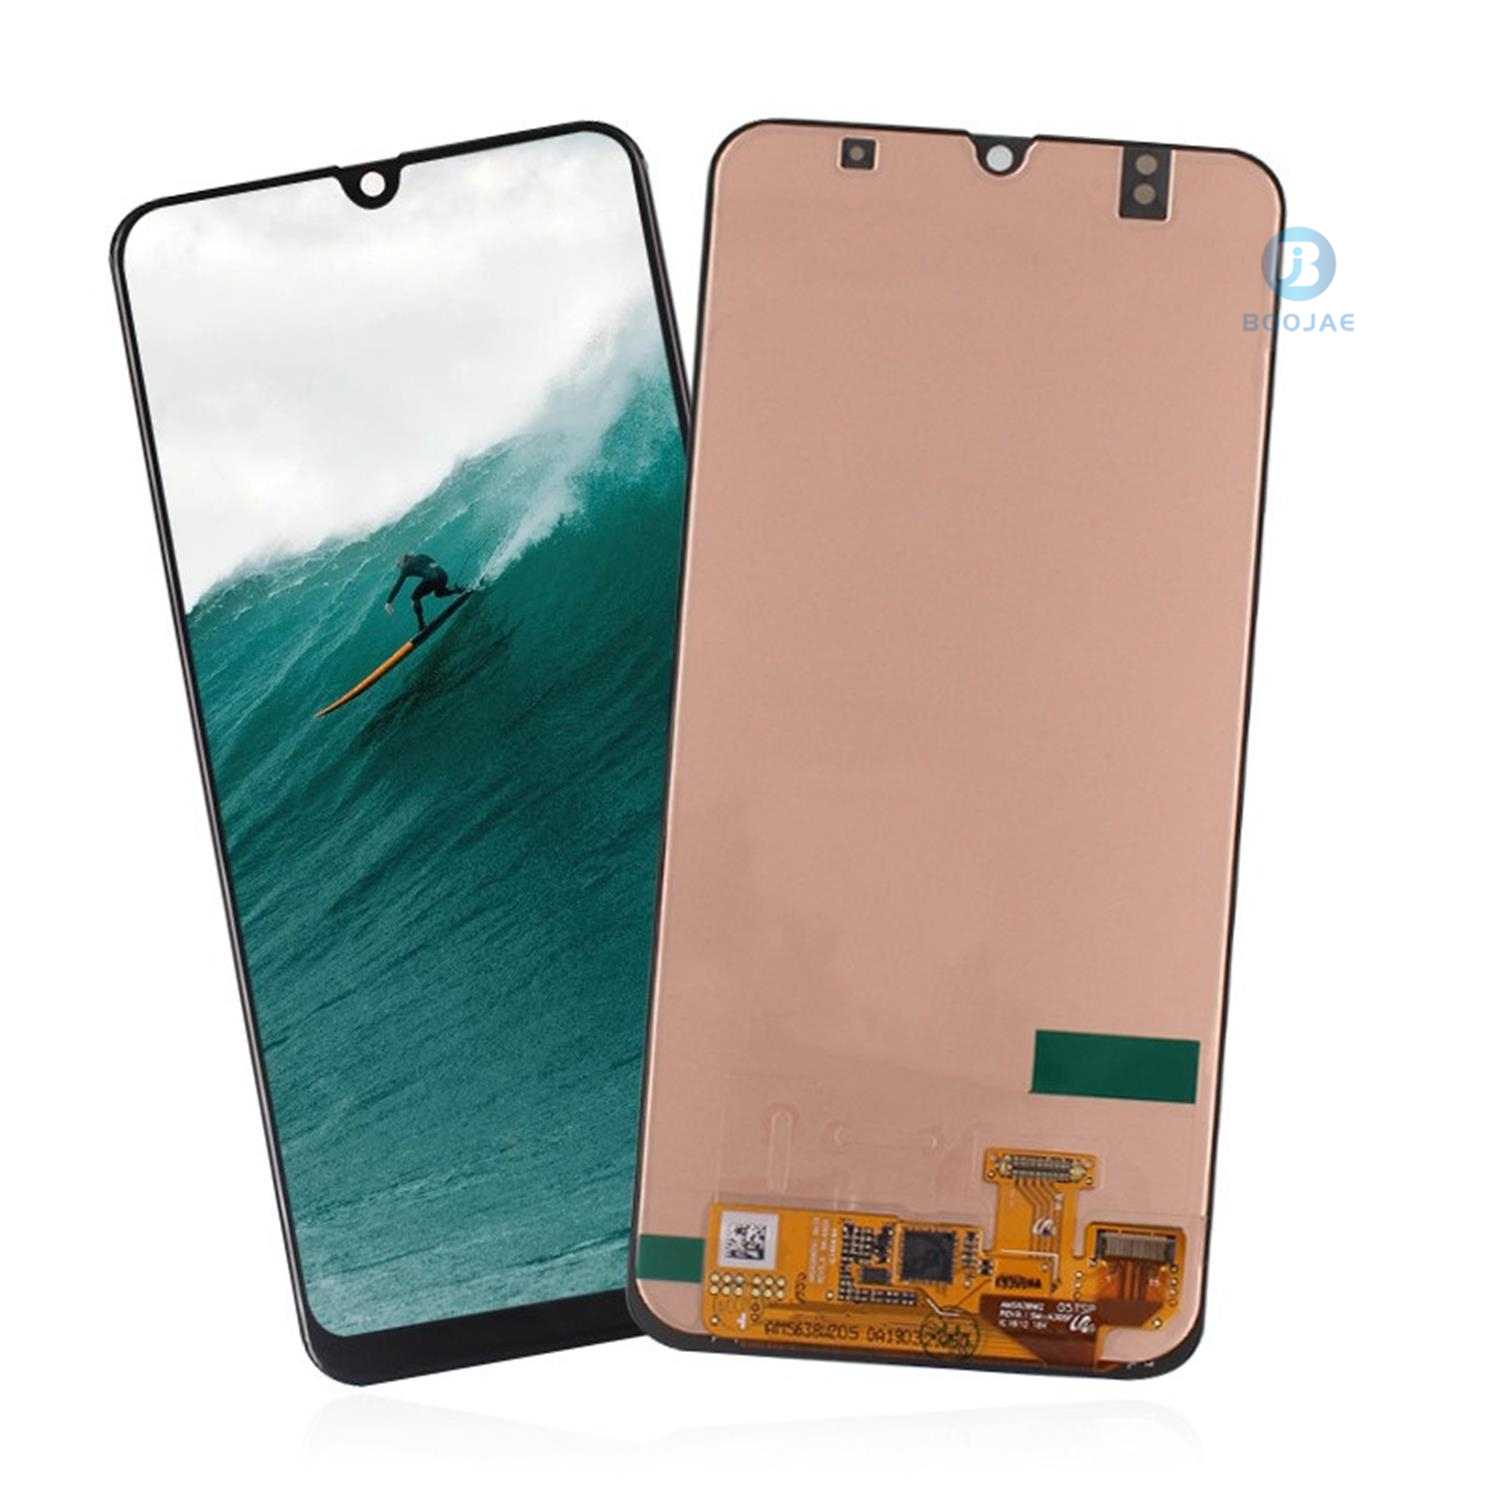 Samsung Galaxy A30 A305 LCD Screen Display and Touch Panel Digitizer Assembly Replacement